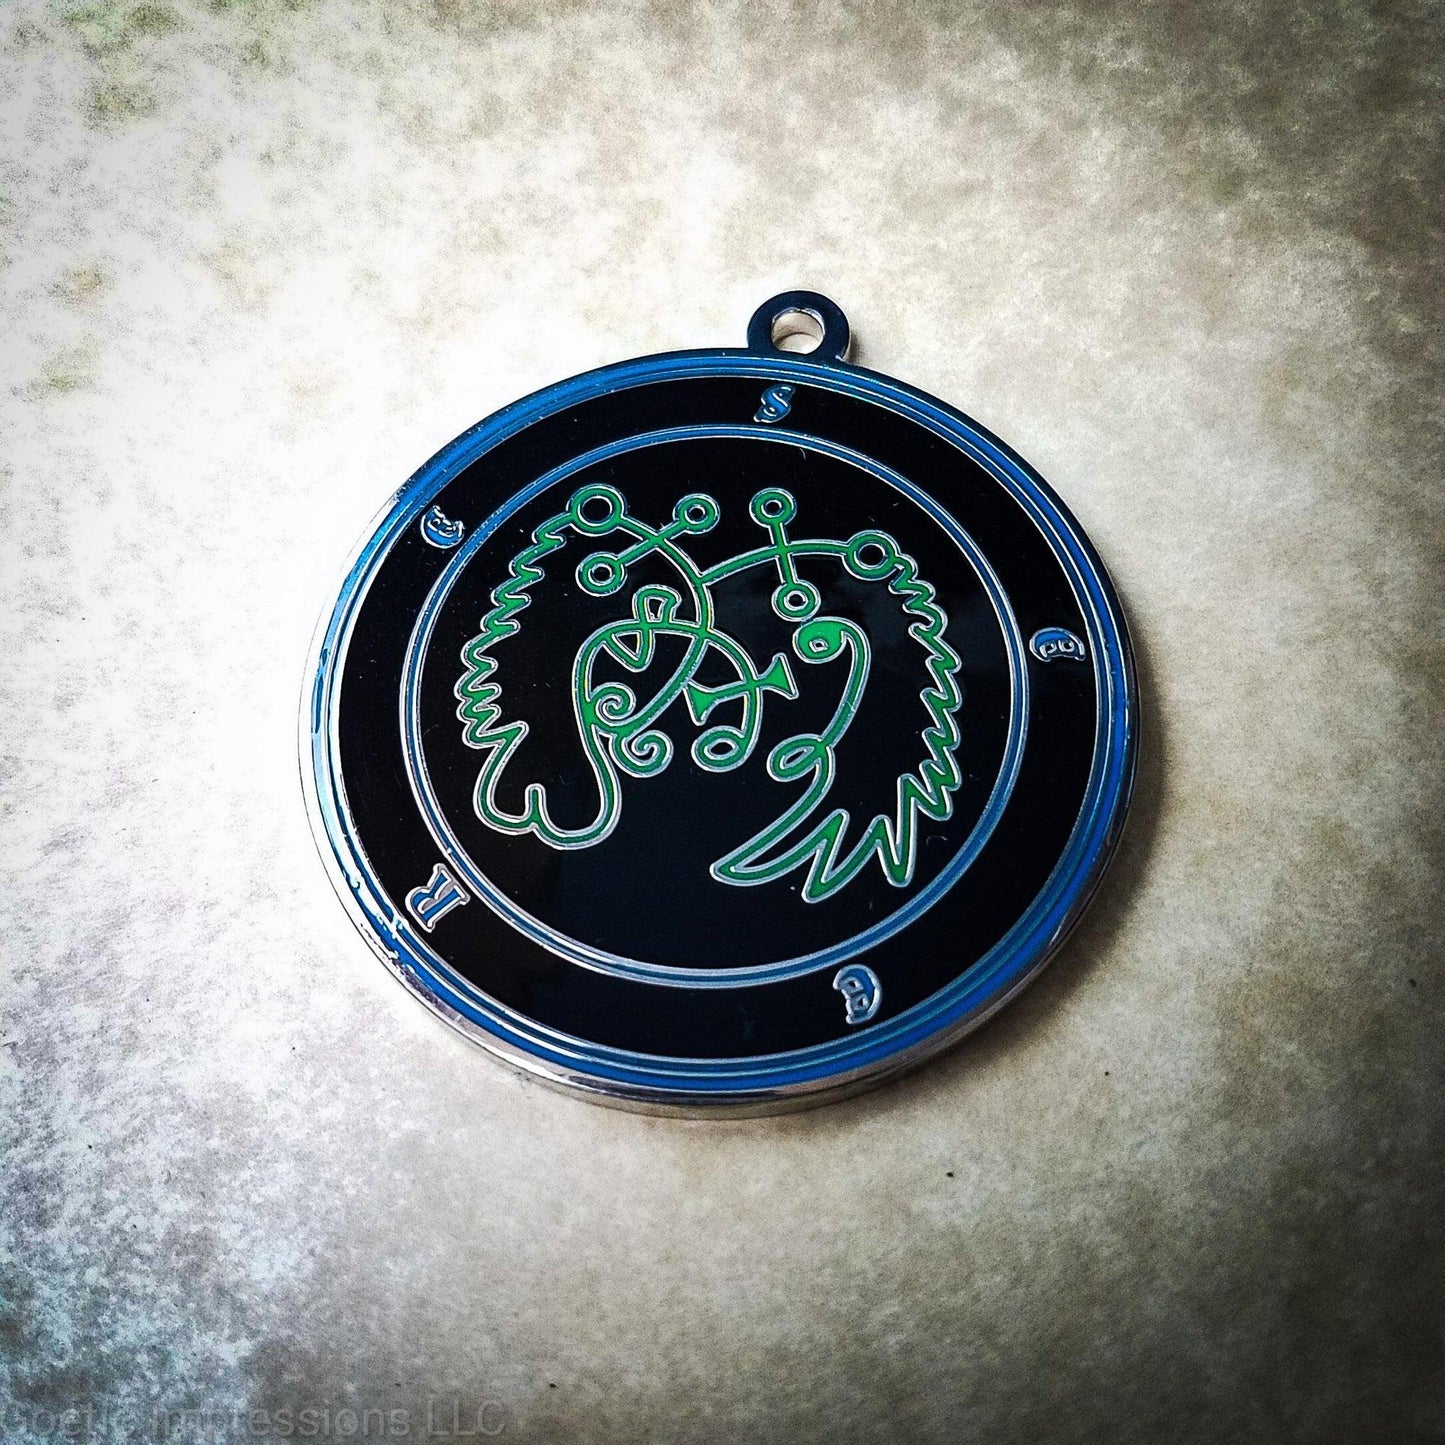 Amulet of Seere. The sigil for Seere is green. Seere's name is surrounding the sigil with concentric circles in blue on a black background.  The seal is silver plated.